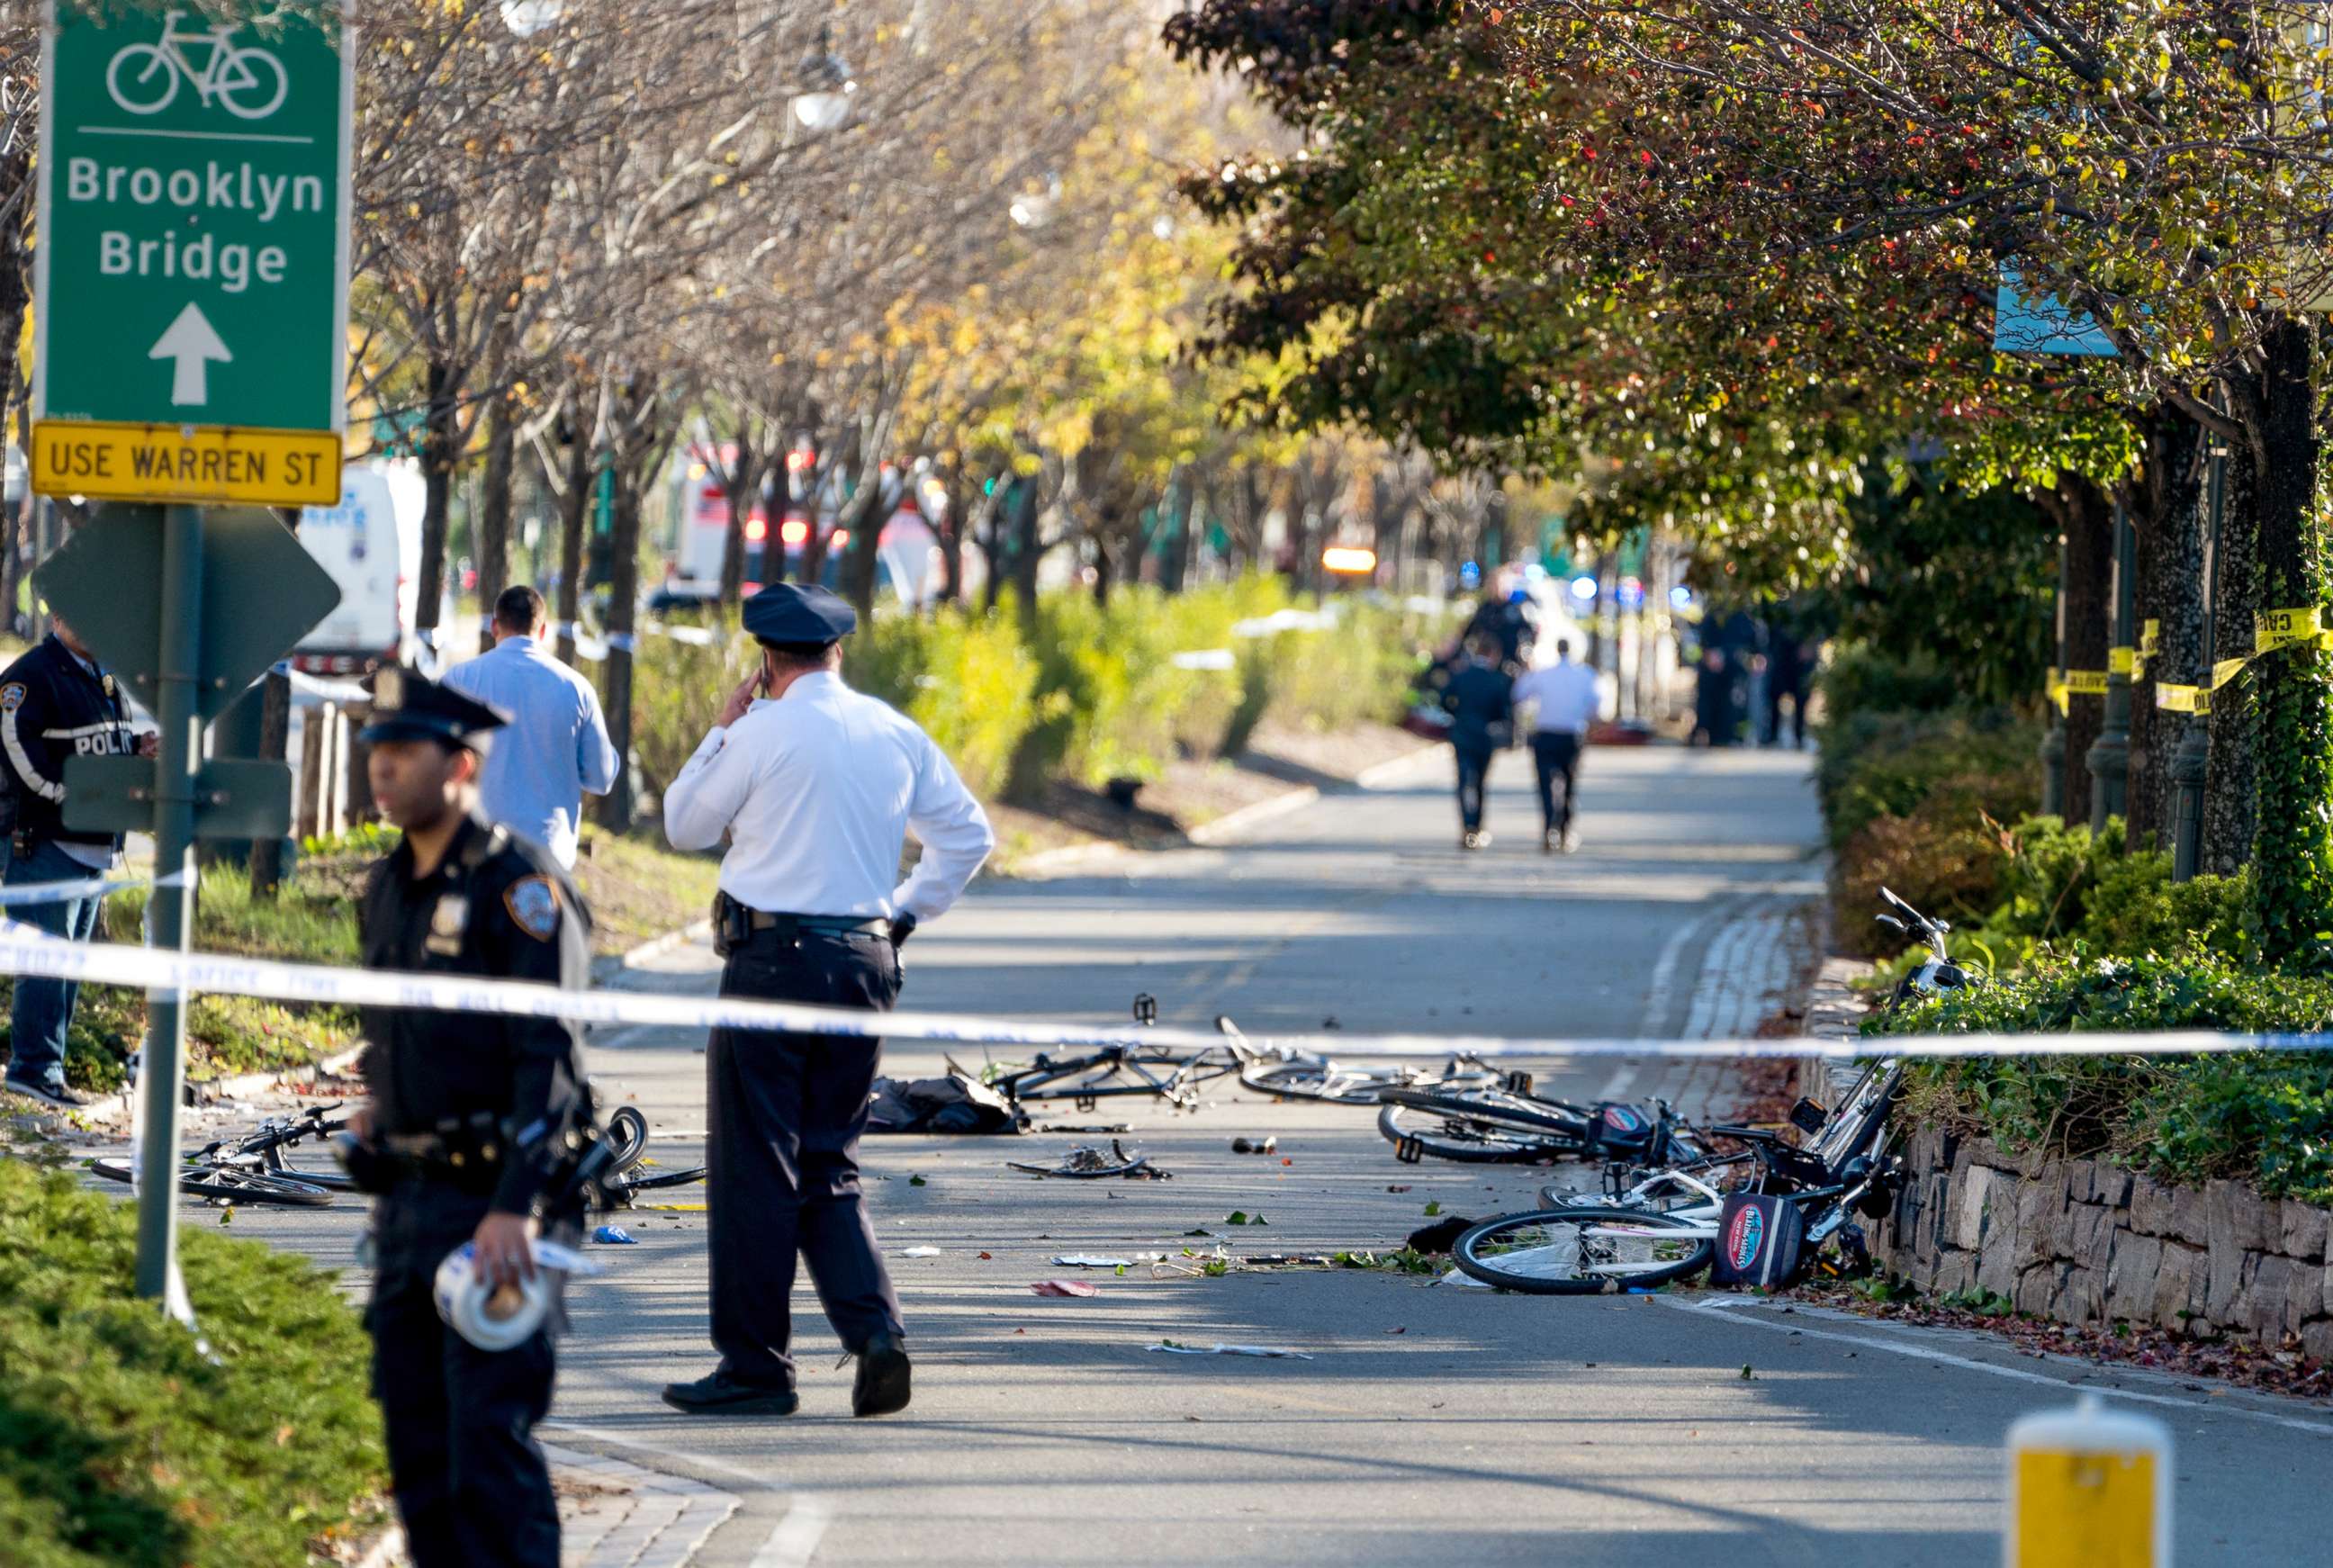 PHOTO: Bicycles and debris lay on a bike path after a motorist drove onto the path near the World Trade Center memorial, striking and killing several people, Oct. 31, 2017.